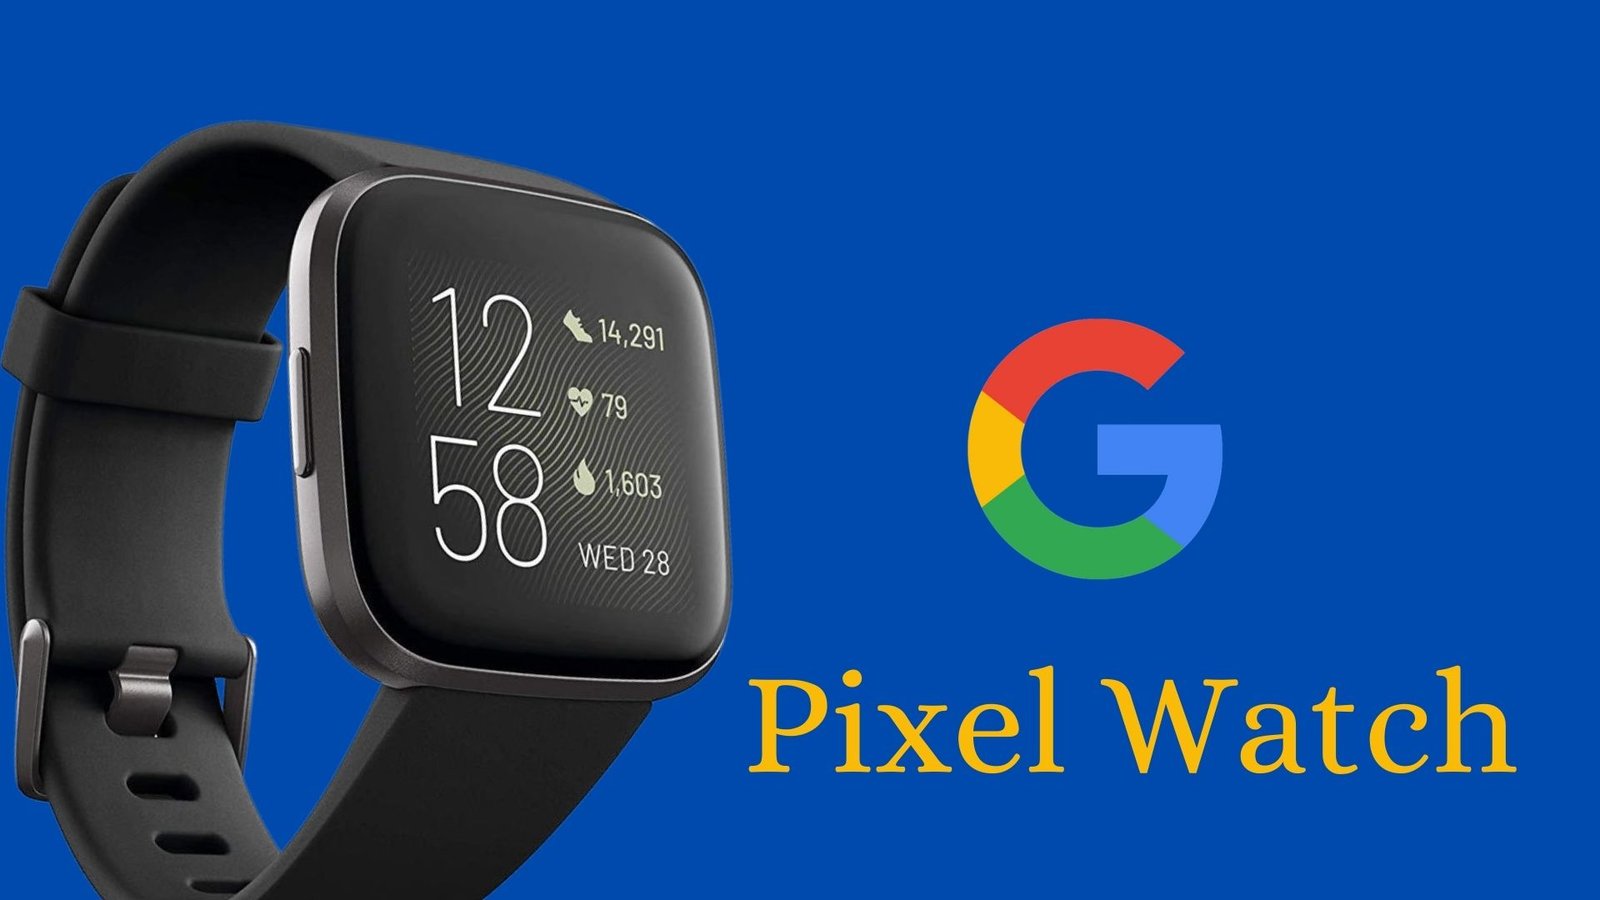 Google Pixel Watch: Its Release Date and What to Expect?